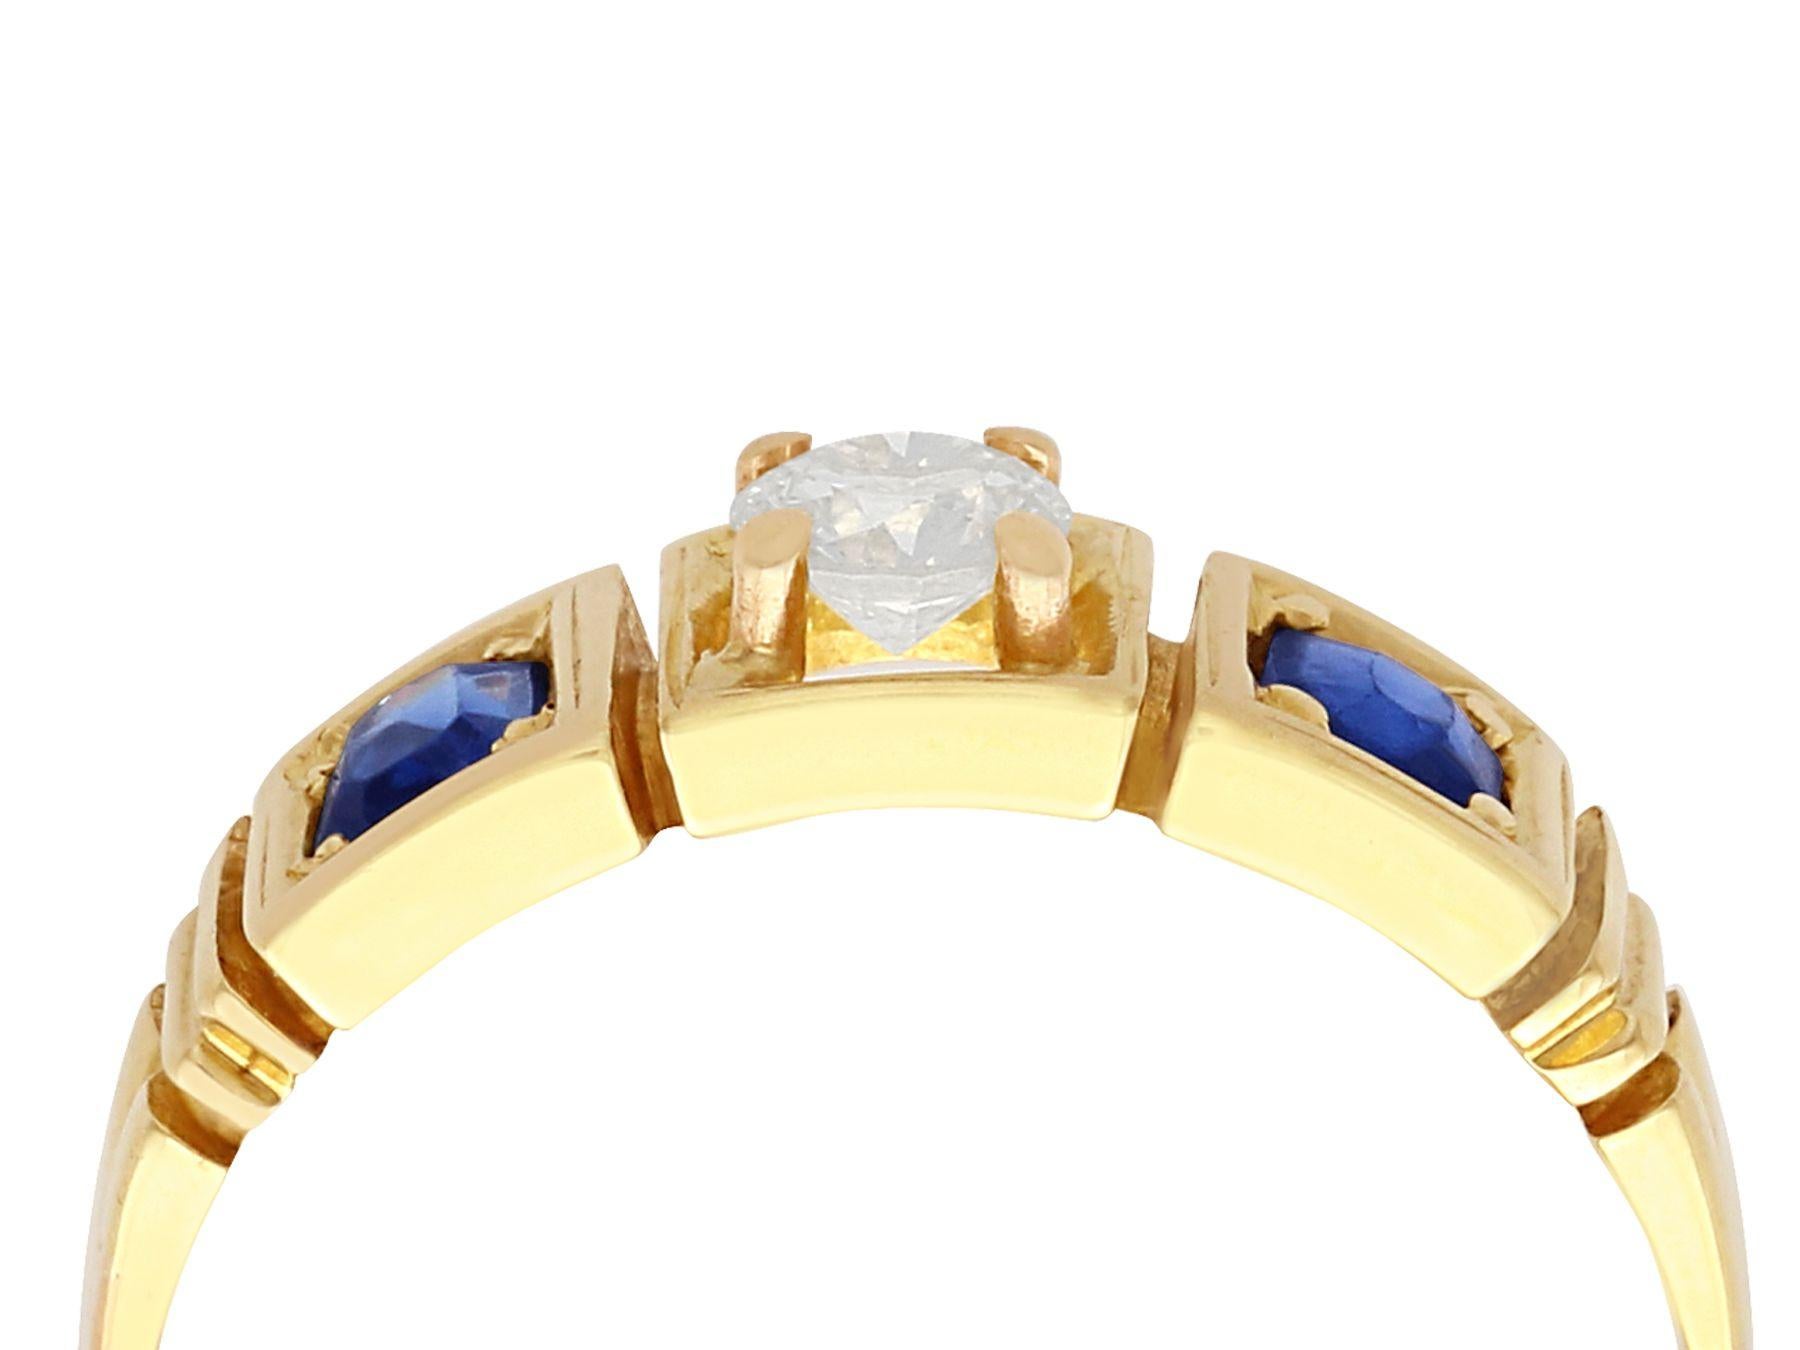 A fine and impressive antique Victorian 0.62 carat natural blue sapphire and 0.29 carat diamond, 15 karat yellow gold three stone dress ring; part of our antique jewelry / estate jewelry collections.

This impressive antique dress ring has been